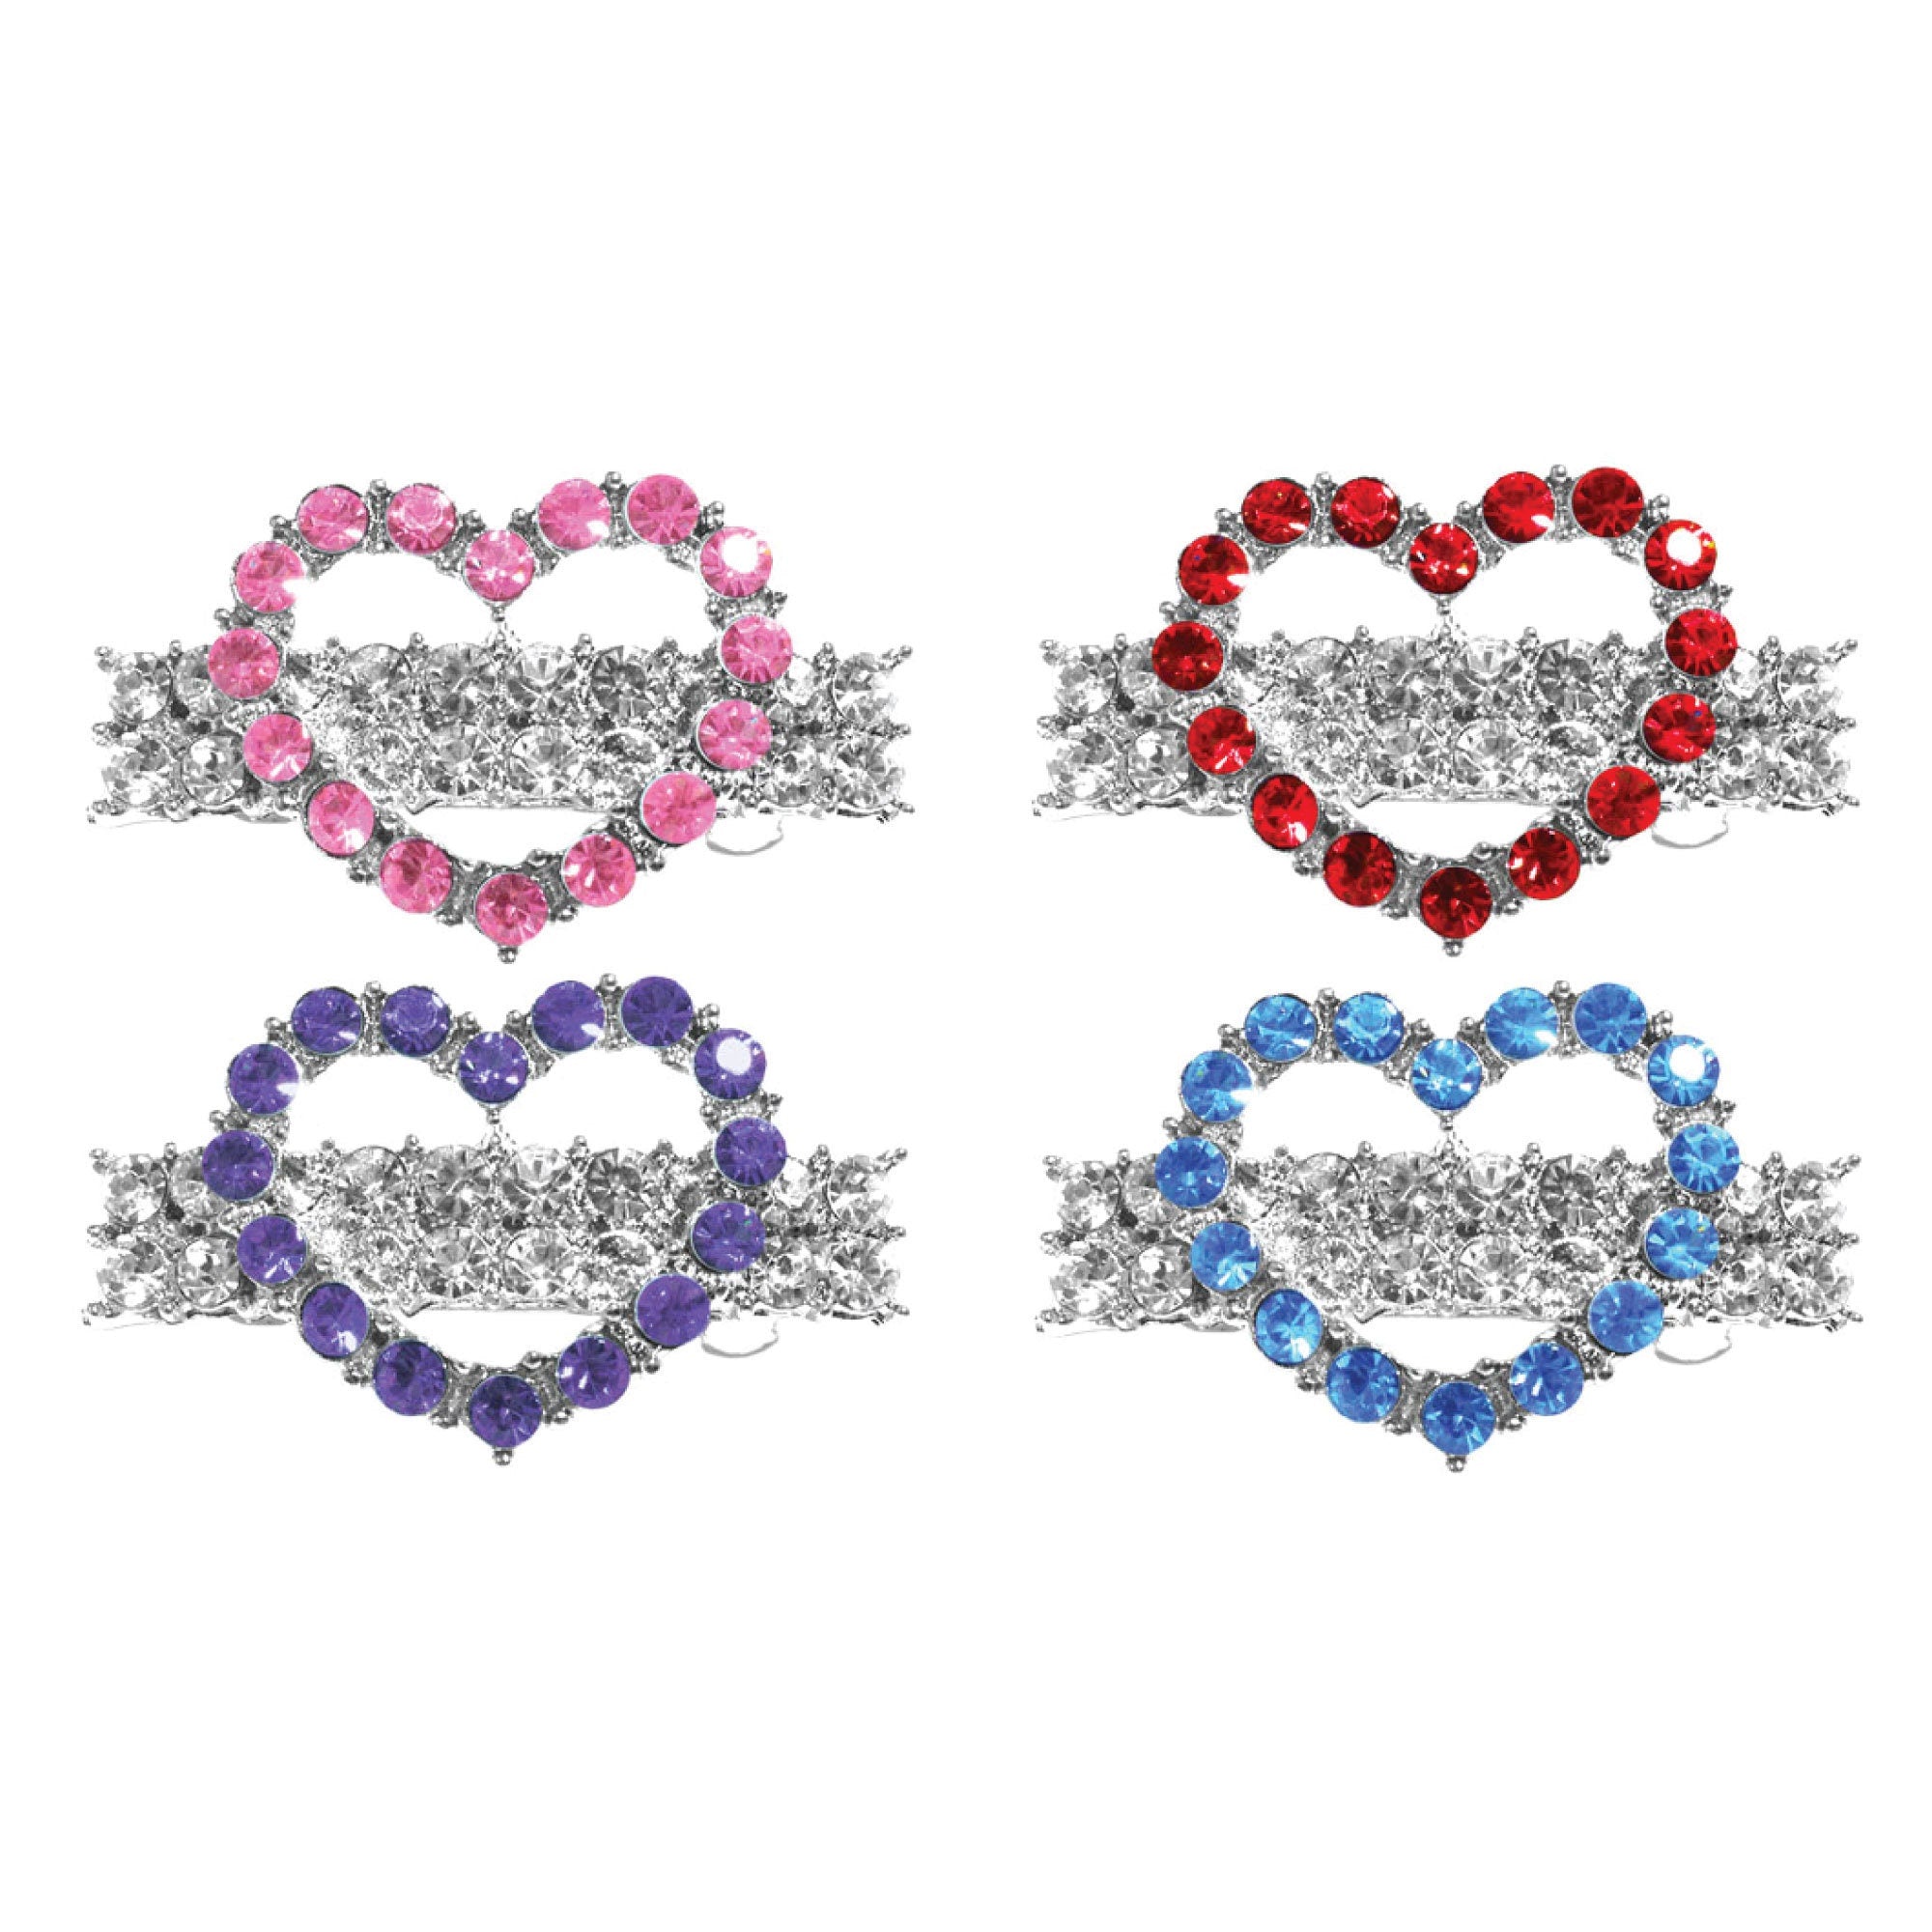 Dog, Puppy & Pet Clip On Grooming Accessory, "Heart Barrette" (Available in 4 different colors!)